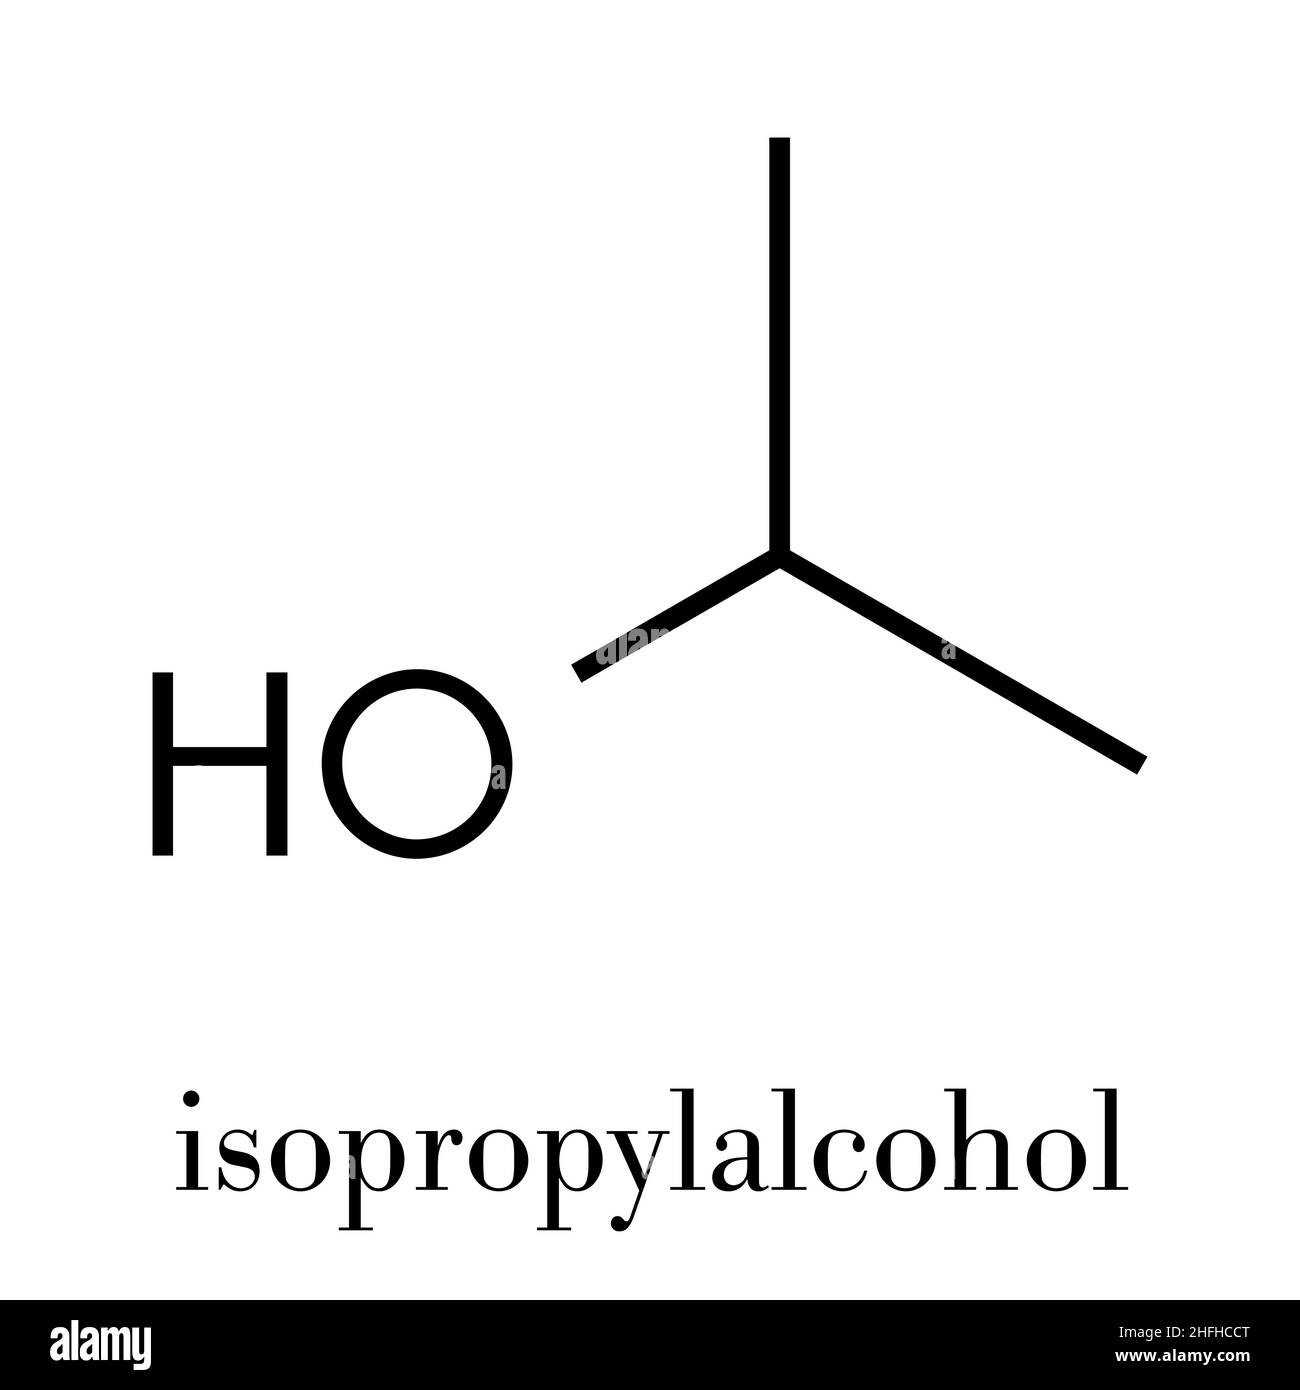 Isopropylalcohol (isopropanol, 2-propanol) molecule. Used in disinfectant solutions and as solvent. Skeletal formula. Stock Vector